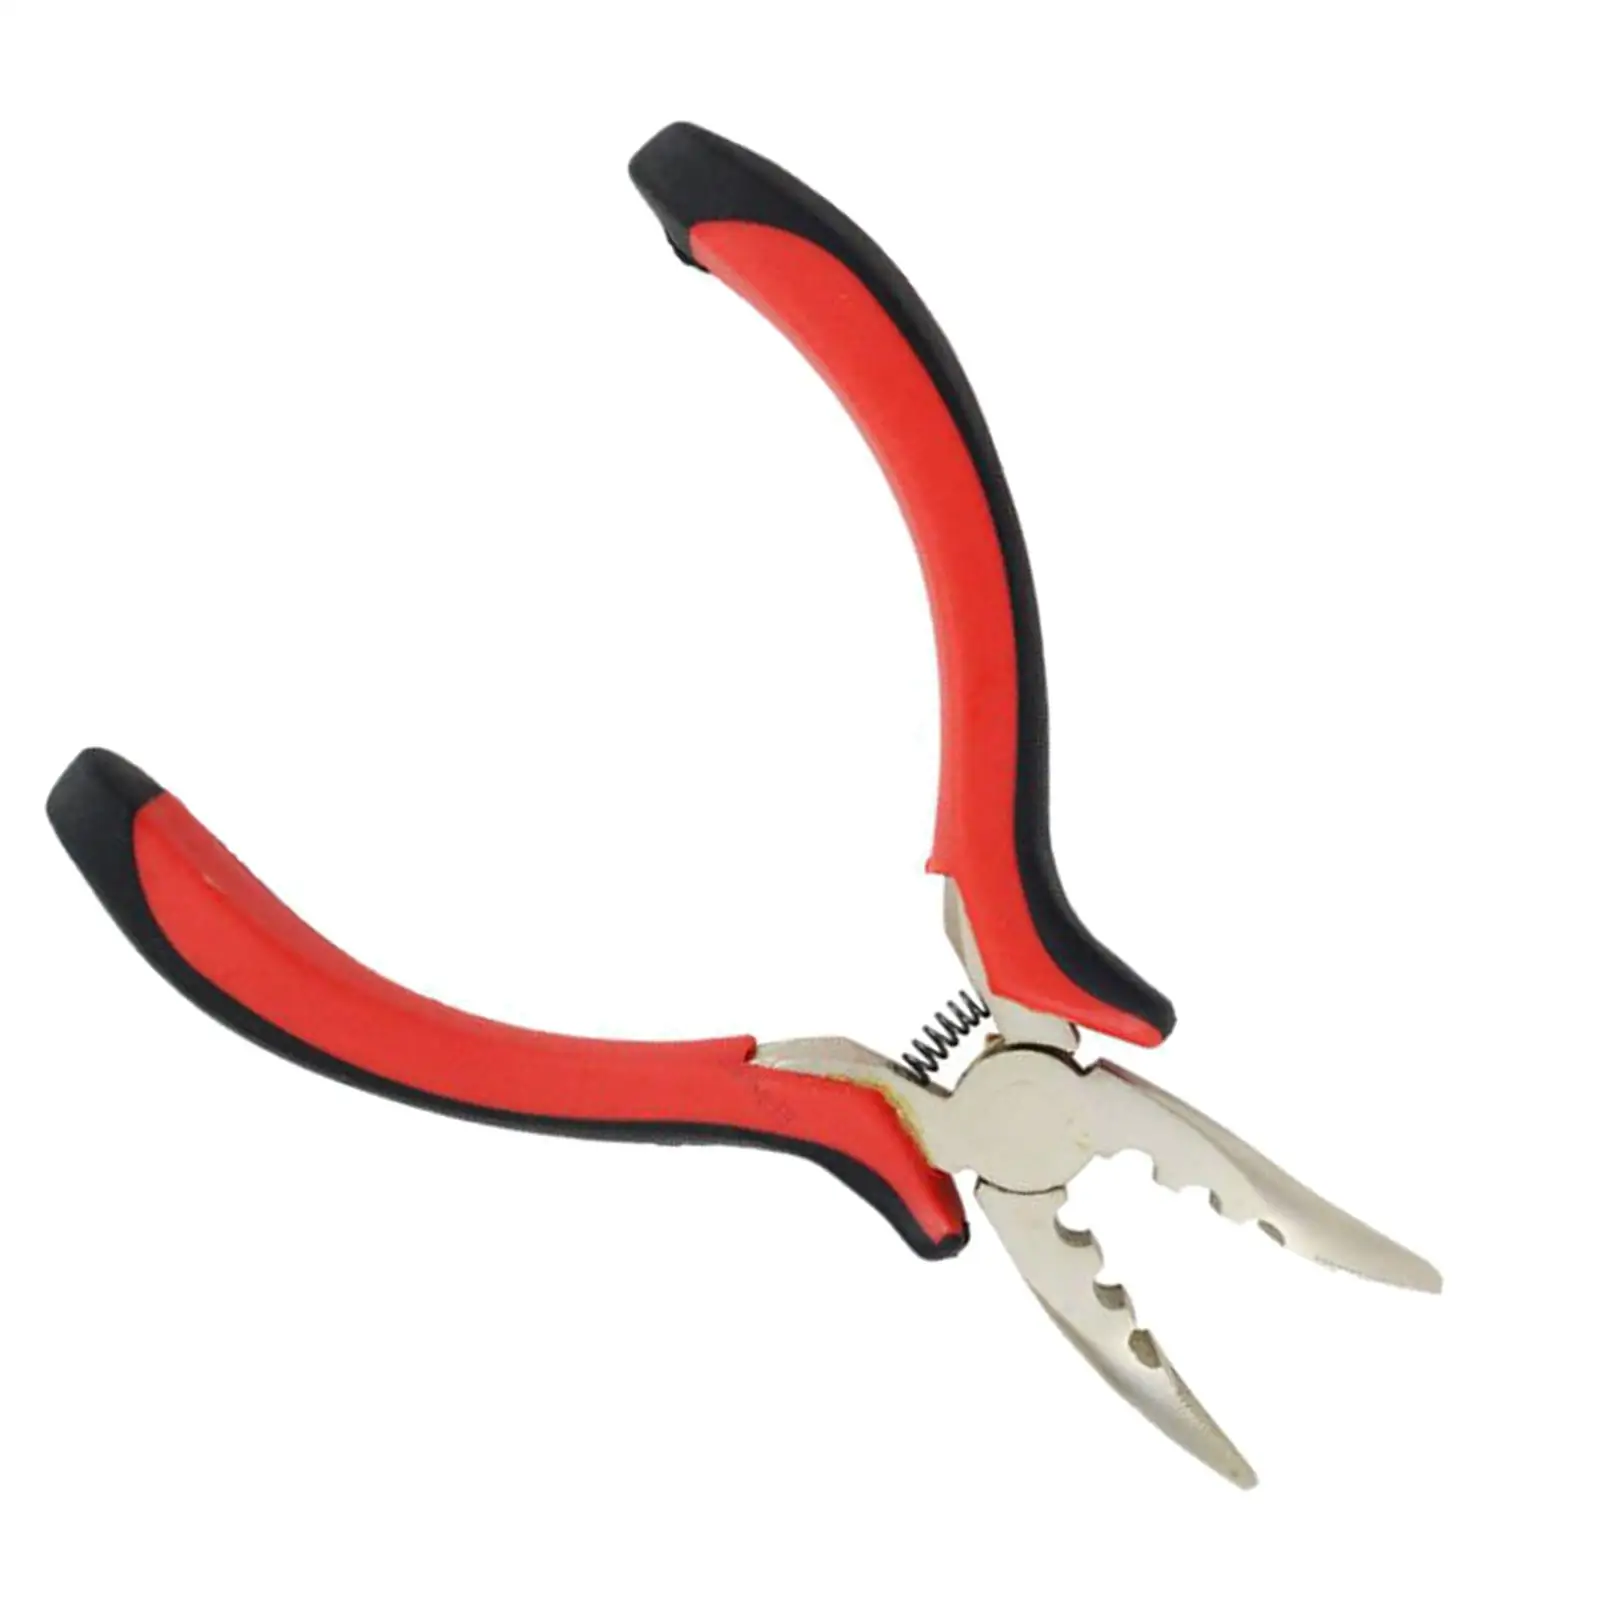 Tape in Hair Extensions Pliers Tool Flat Surface for Hair Extensions